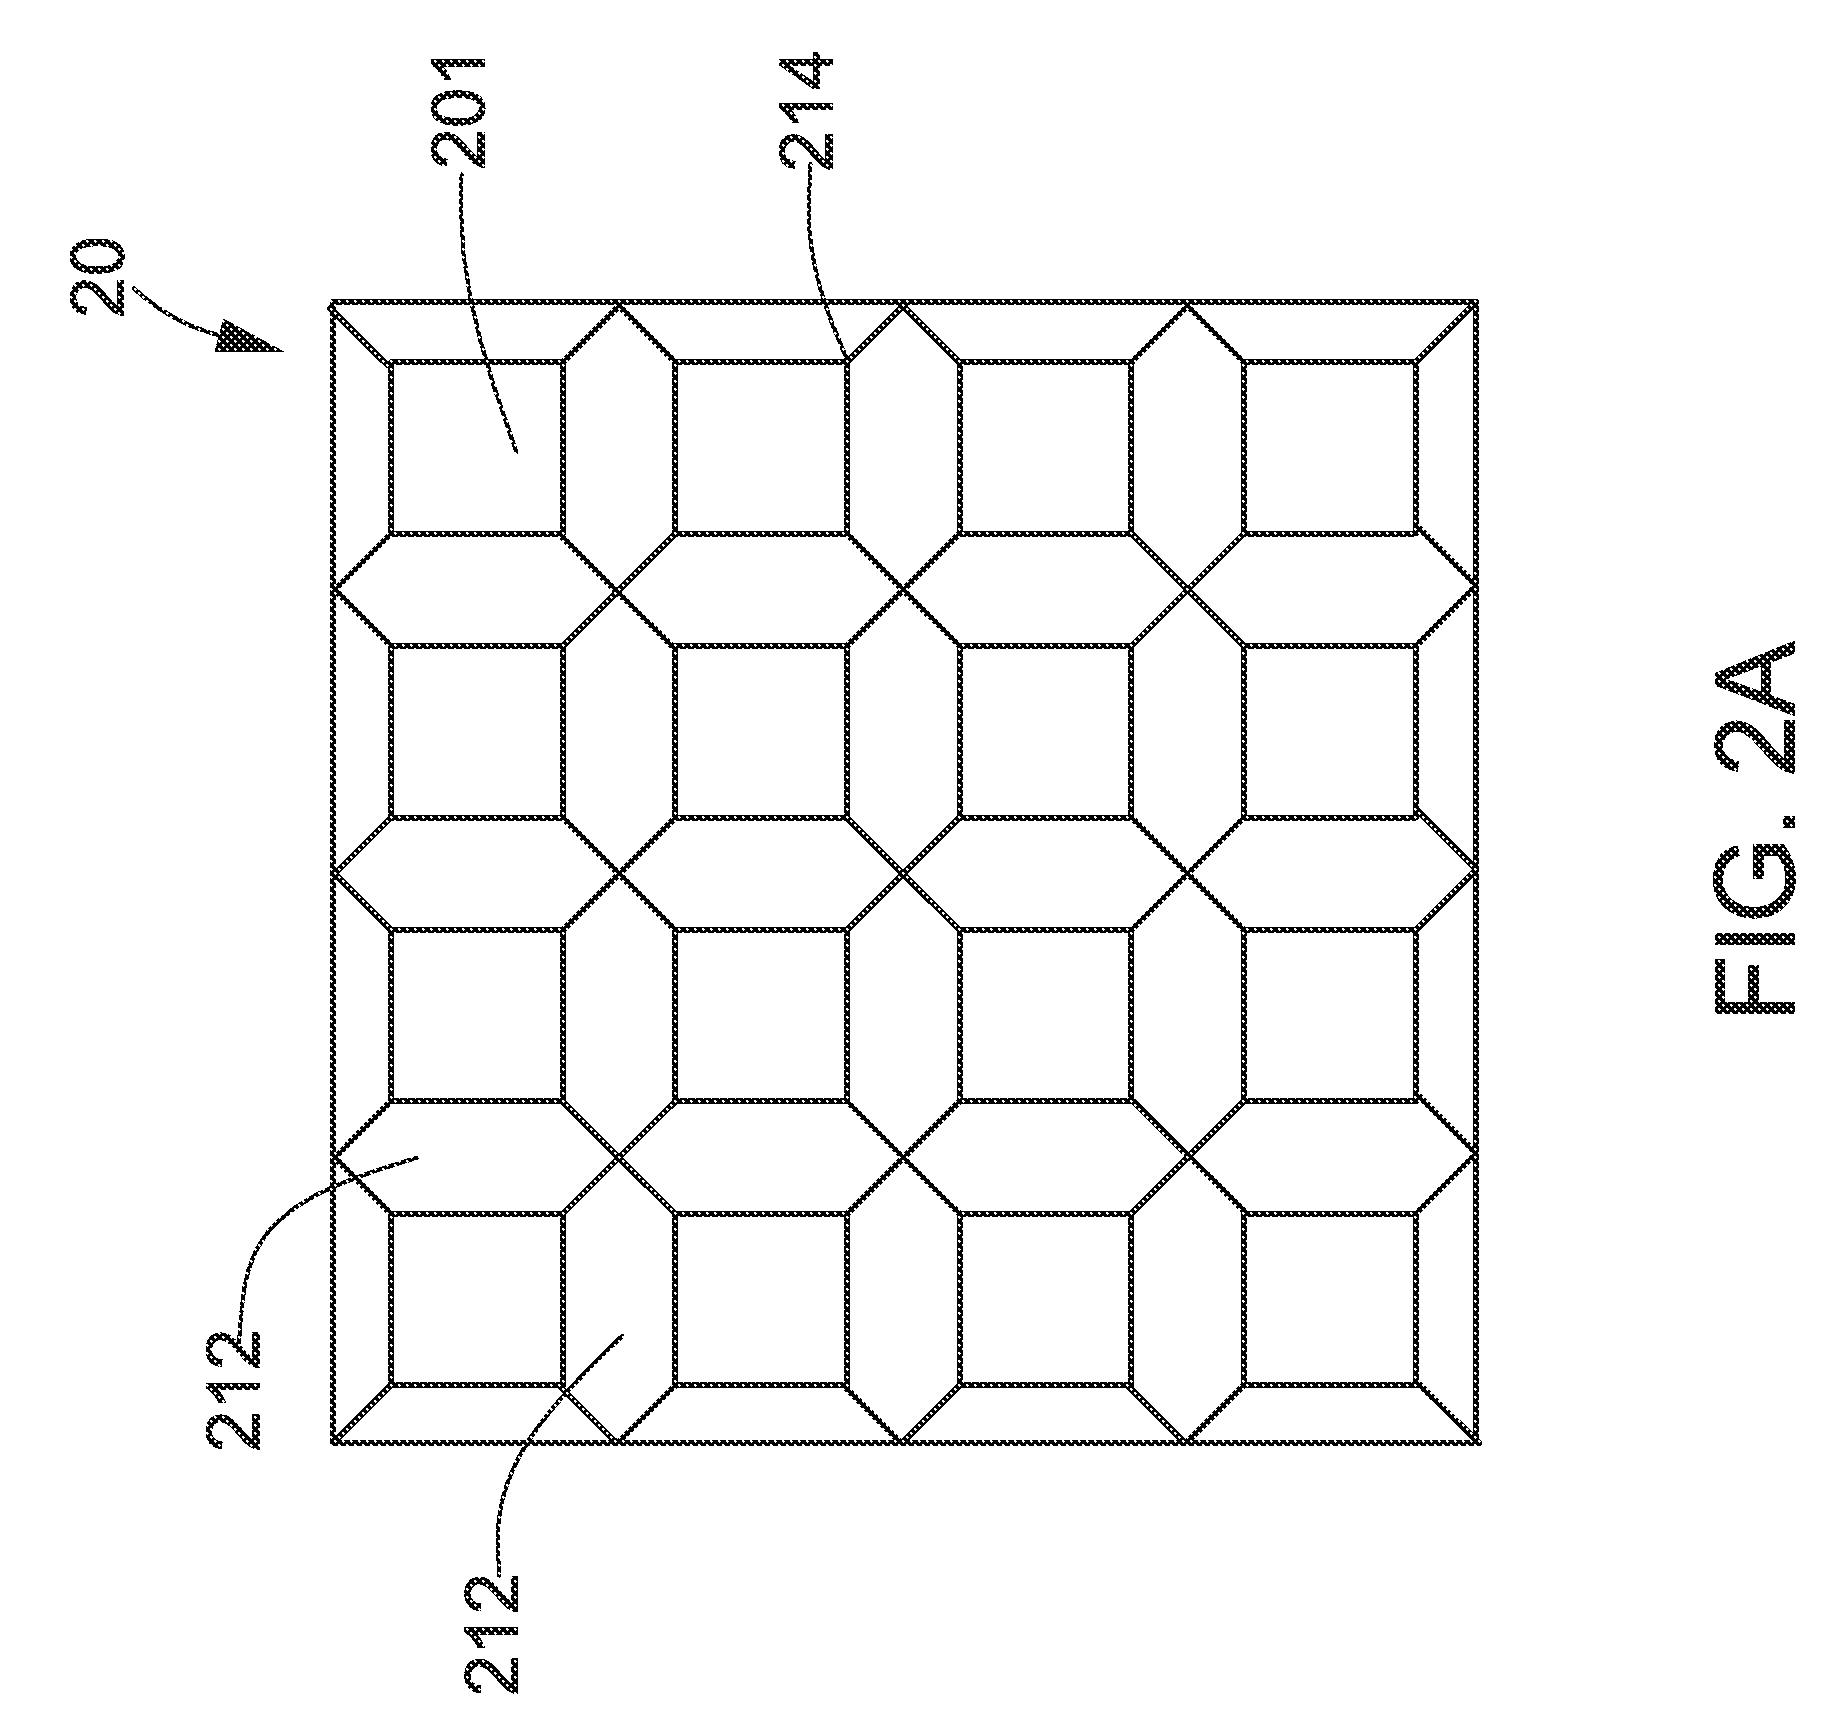 Multi-chips package structure and the method thereof